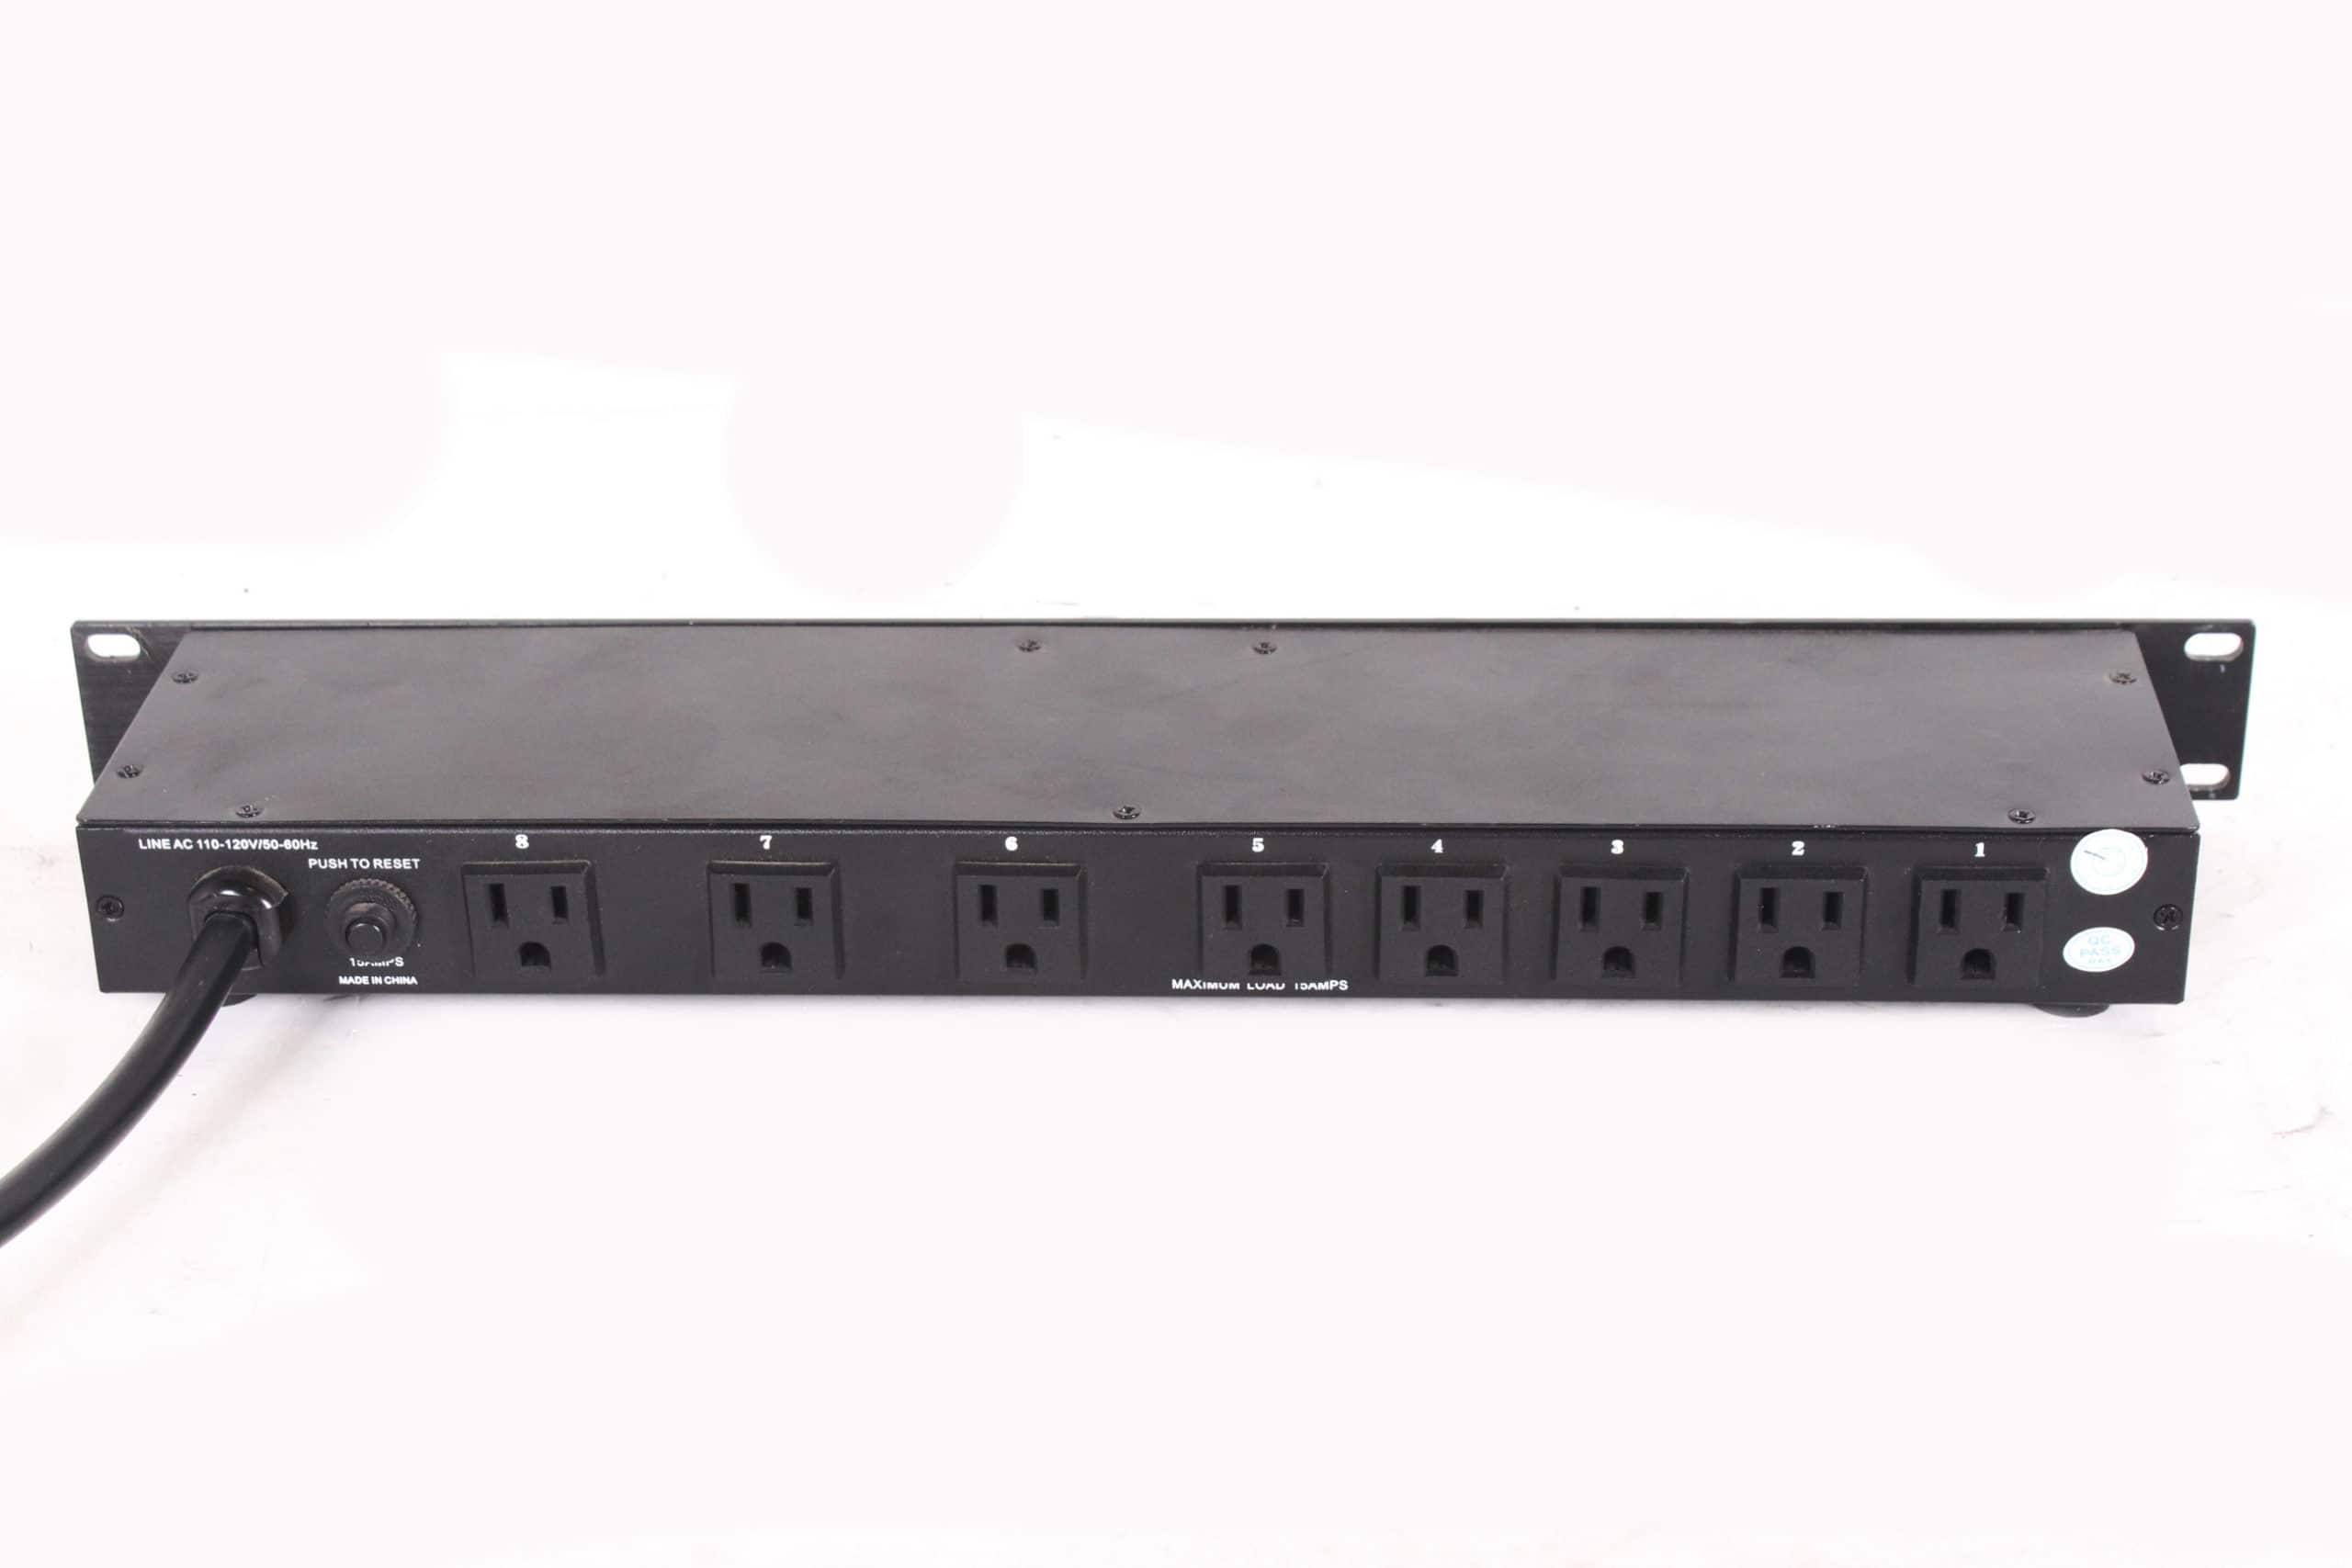 Pyle PCO850 - 15 Amp Power Supply Conditioner Rack Mountable Power Strip  Surge Protector with 9 Outlets 